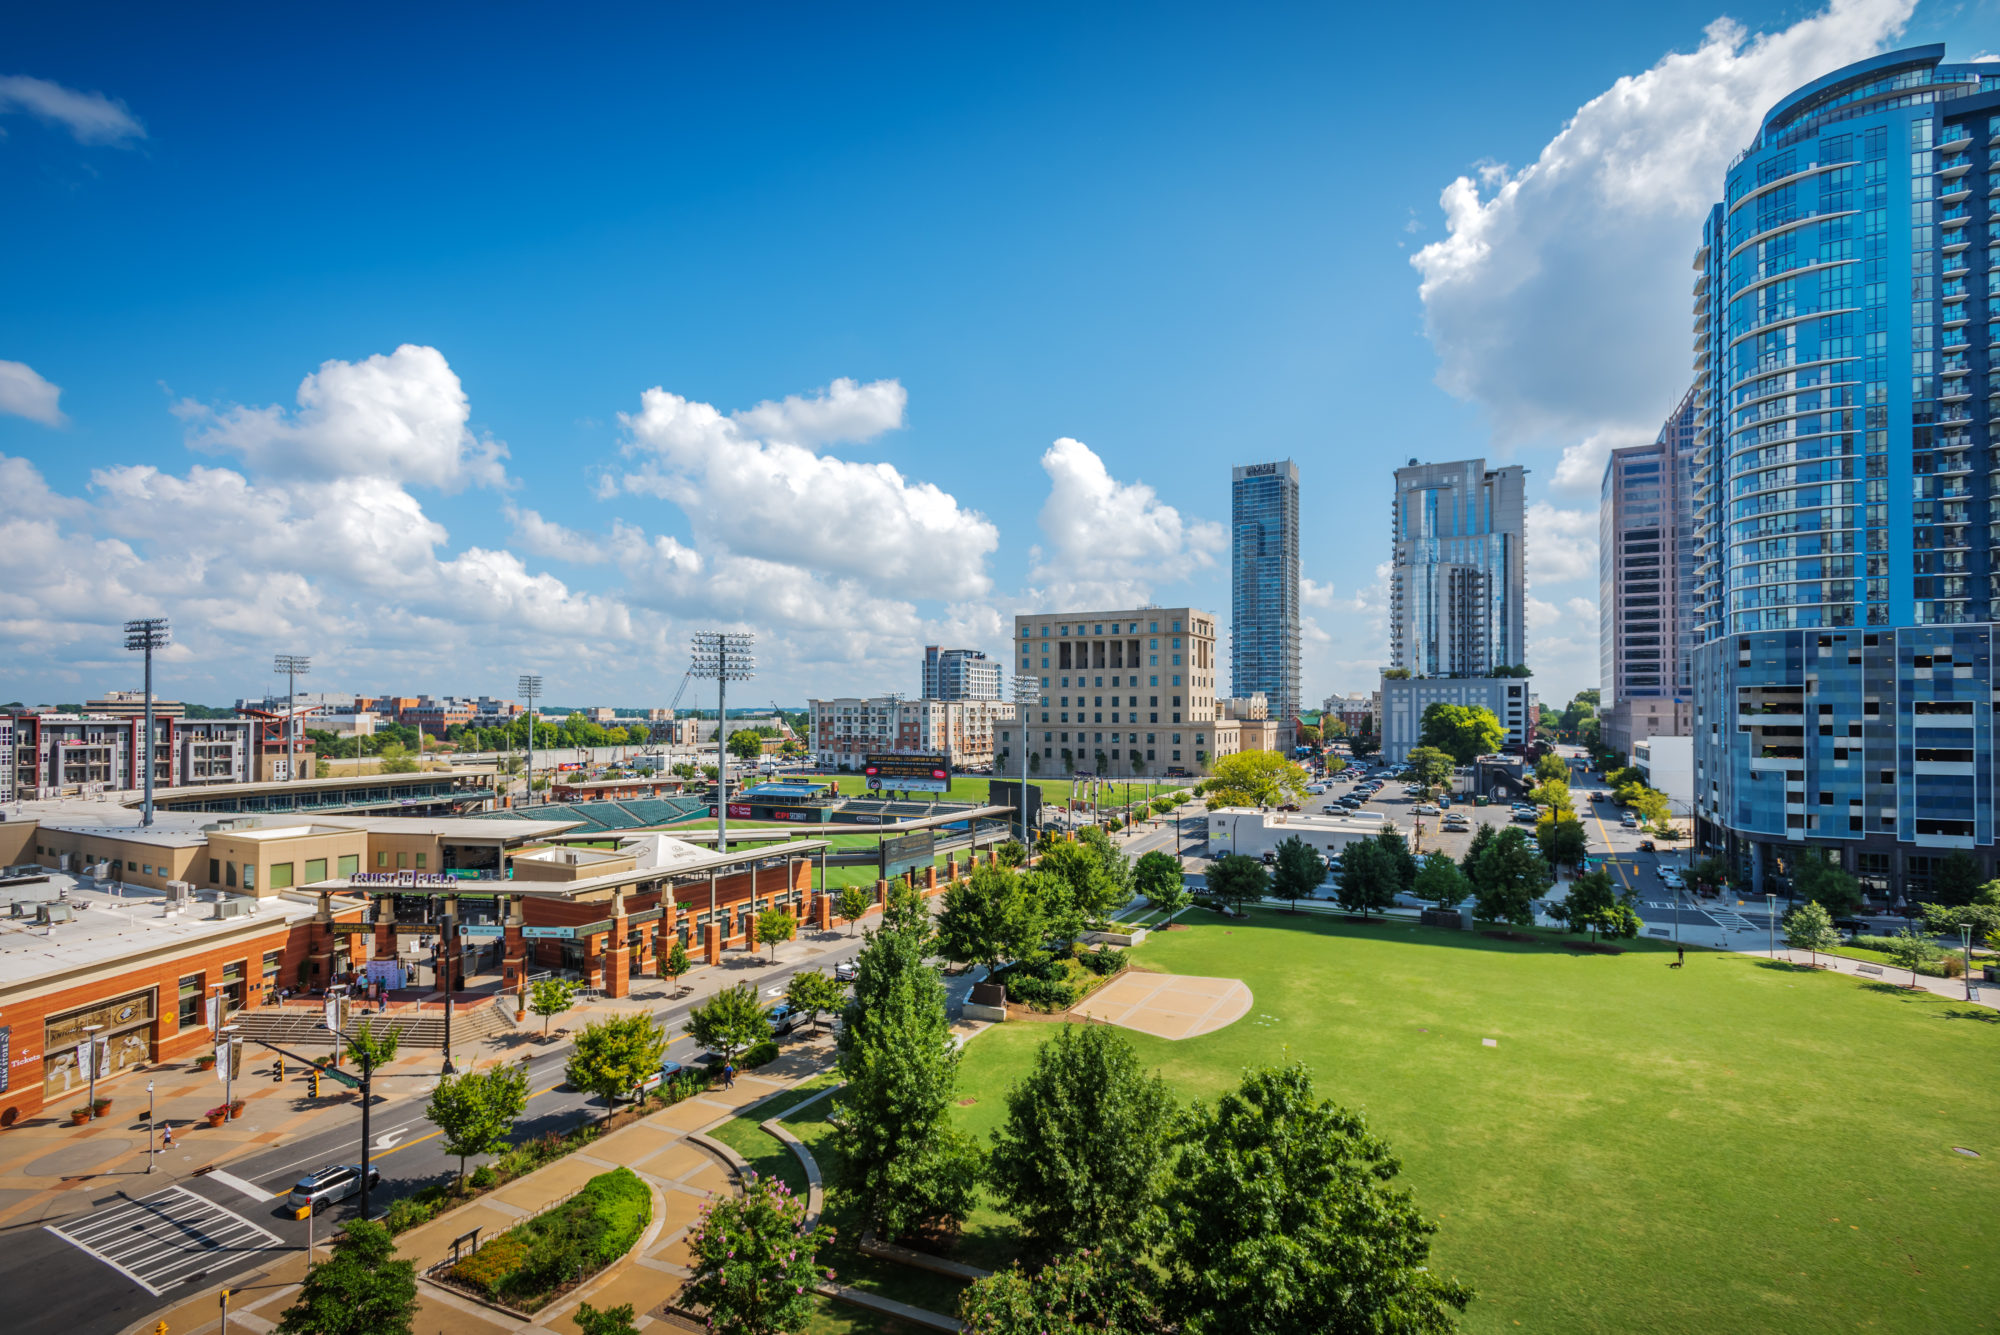 Views of Truist Field and Romare Bearden Park in Uptown Charlotte